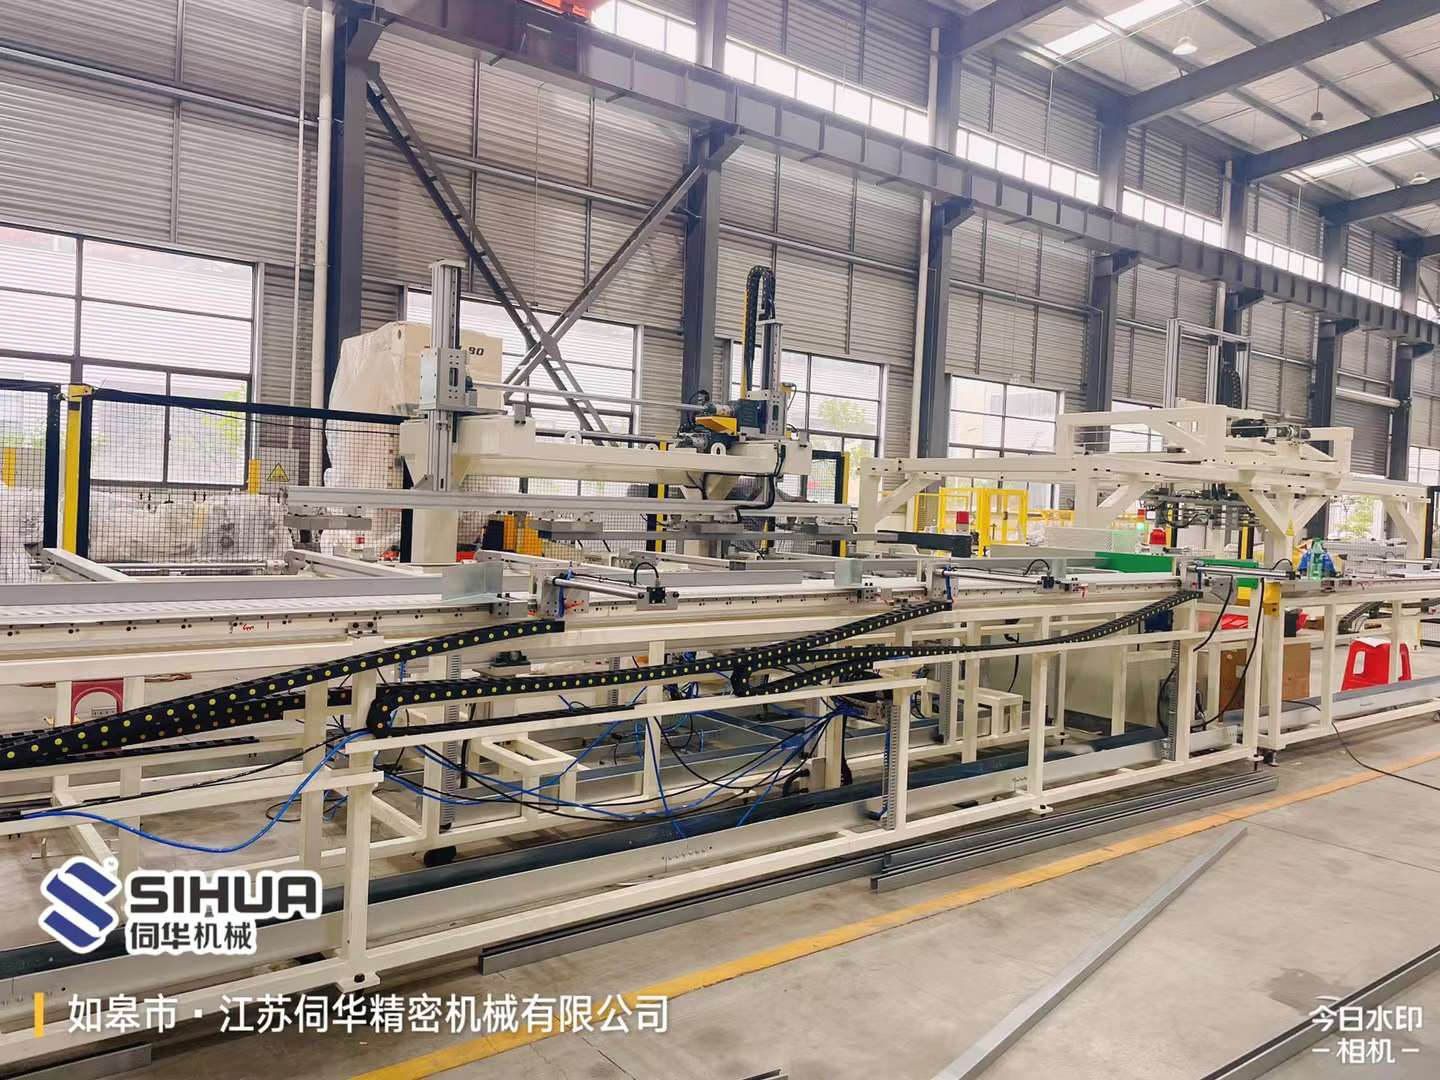 SIHUA 41×41 automatic packing system replaces the boring work of human beings